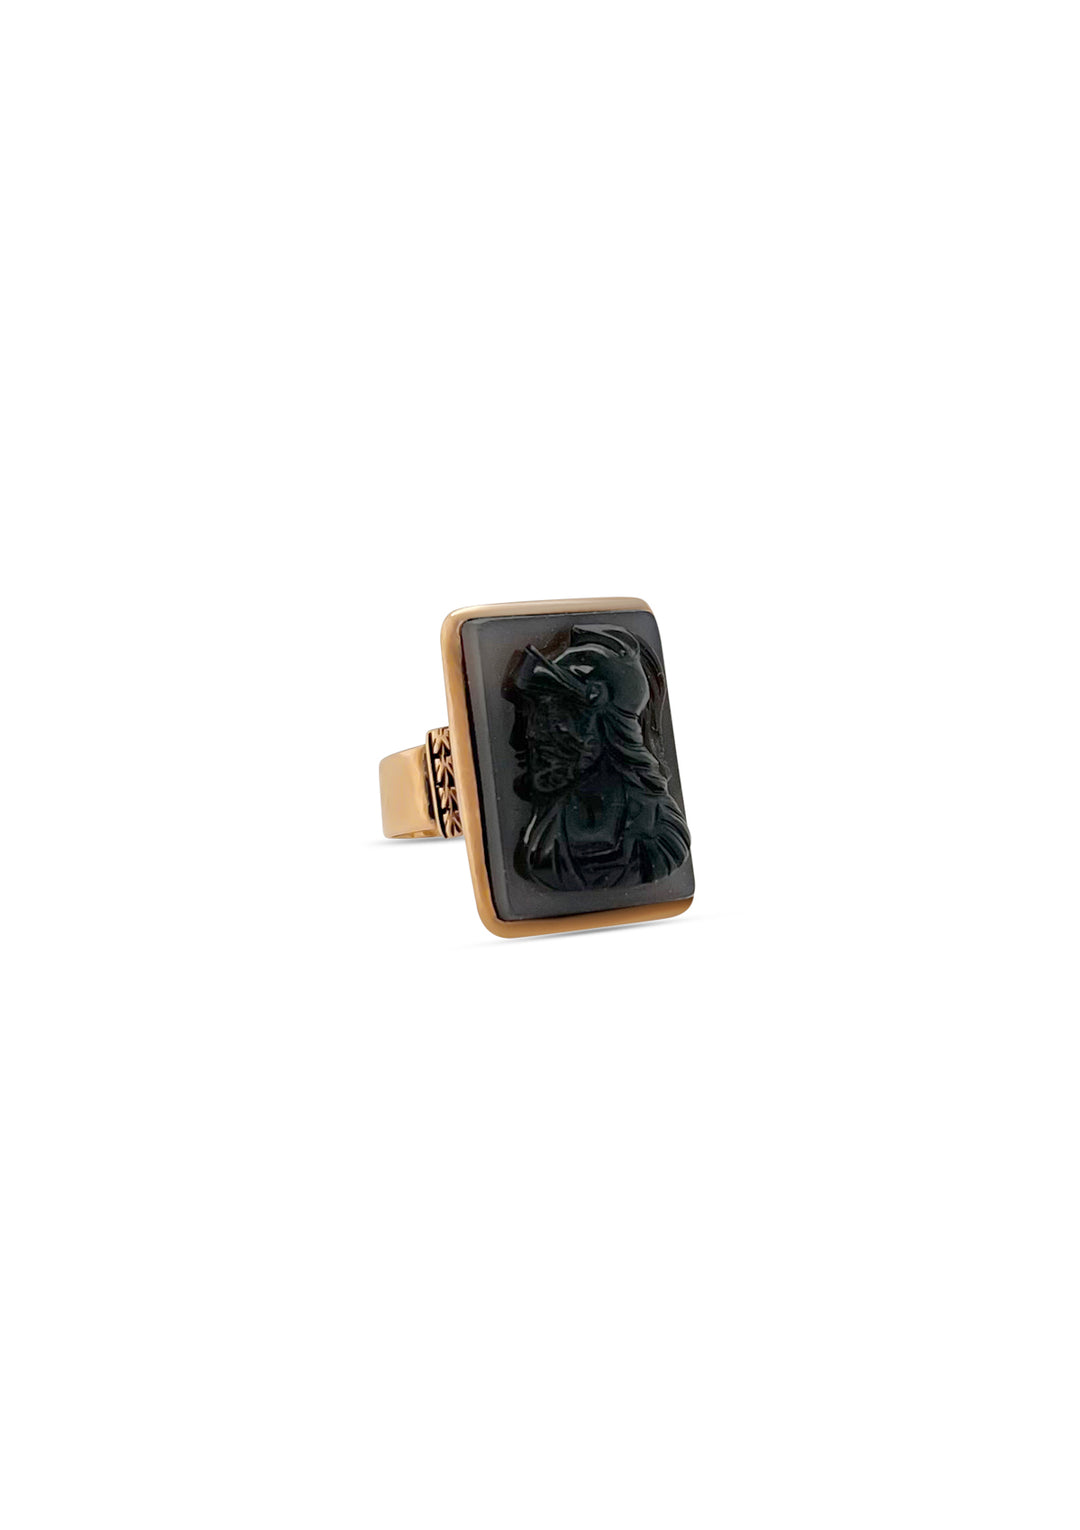 8K Yellow Gold 1910's Carved Agate Cameo Ring